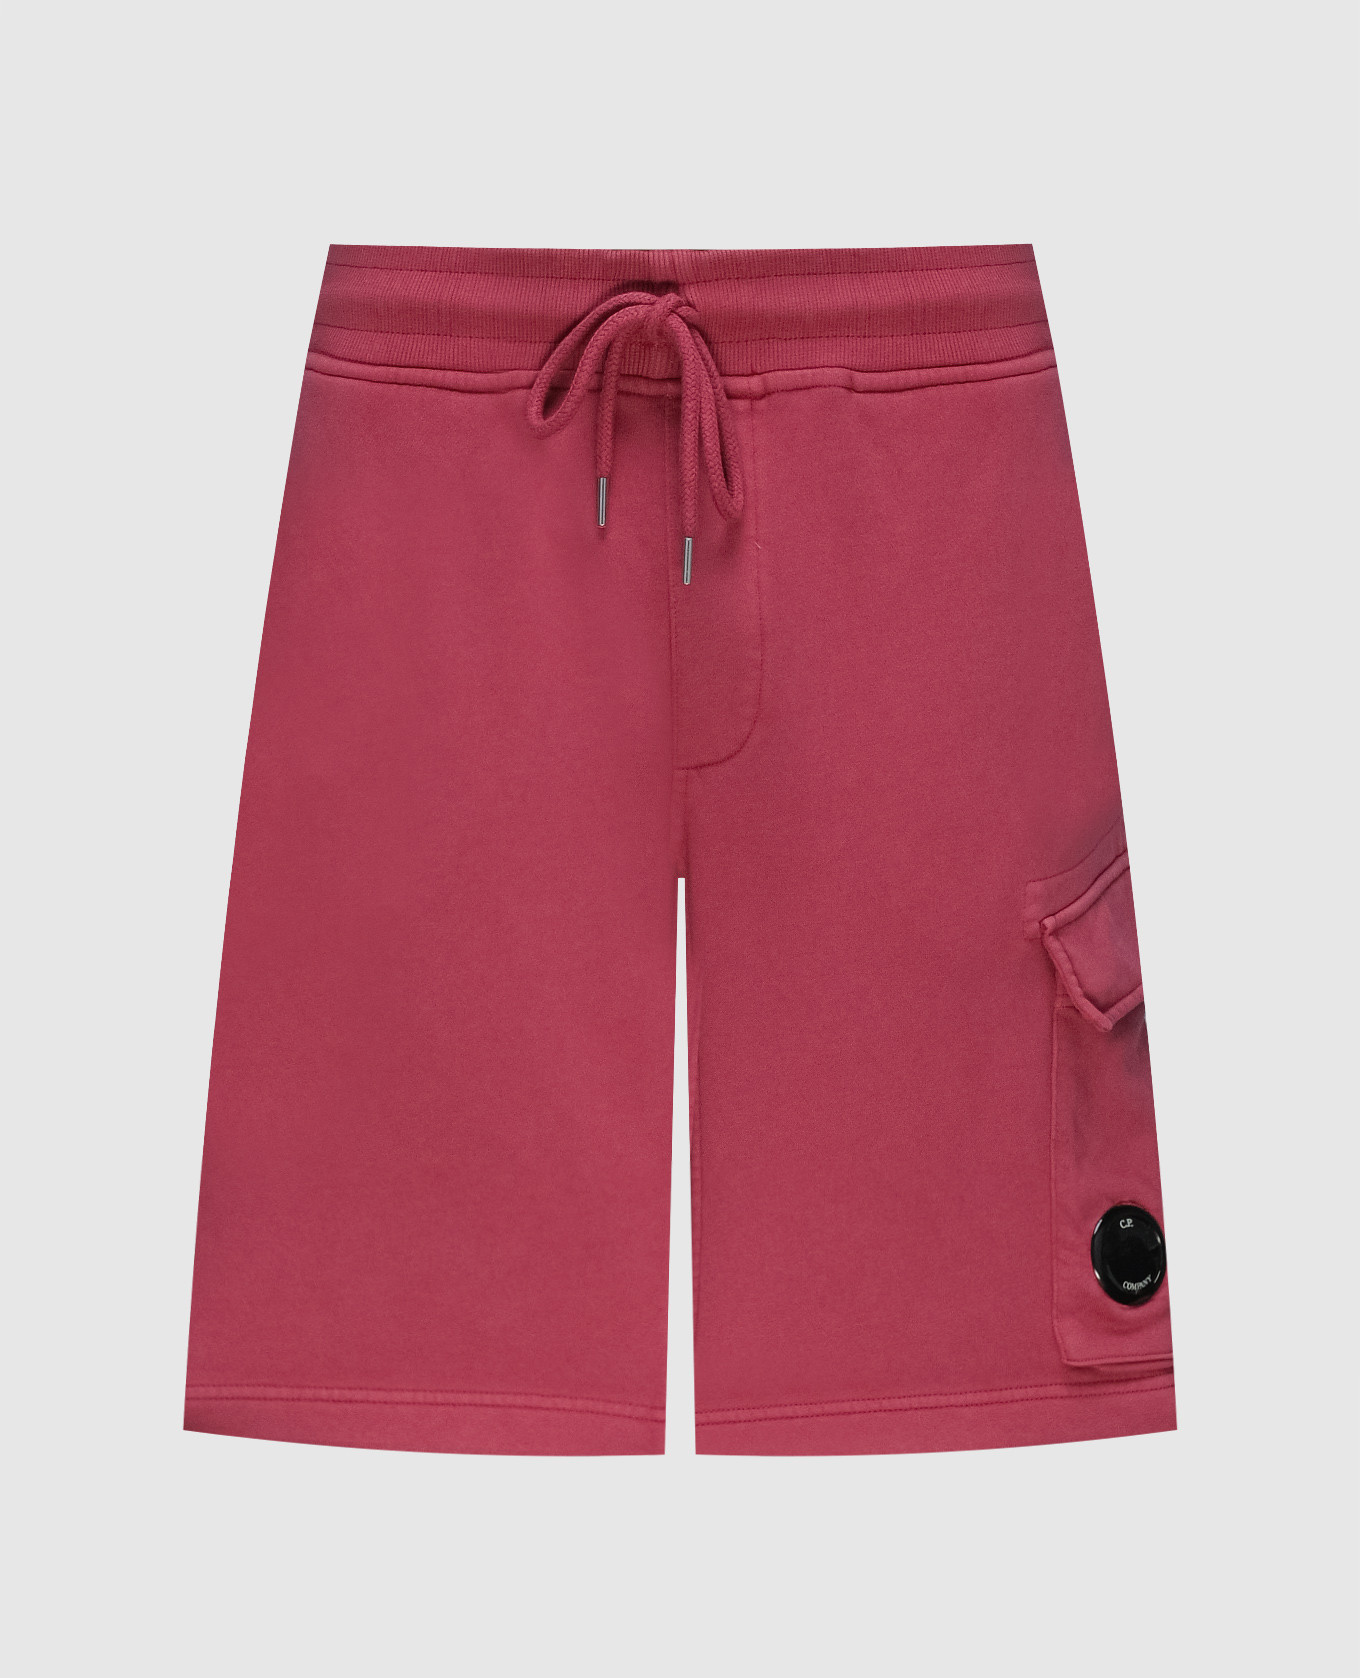 Burgundy shorts with a logo